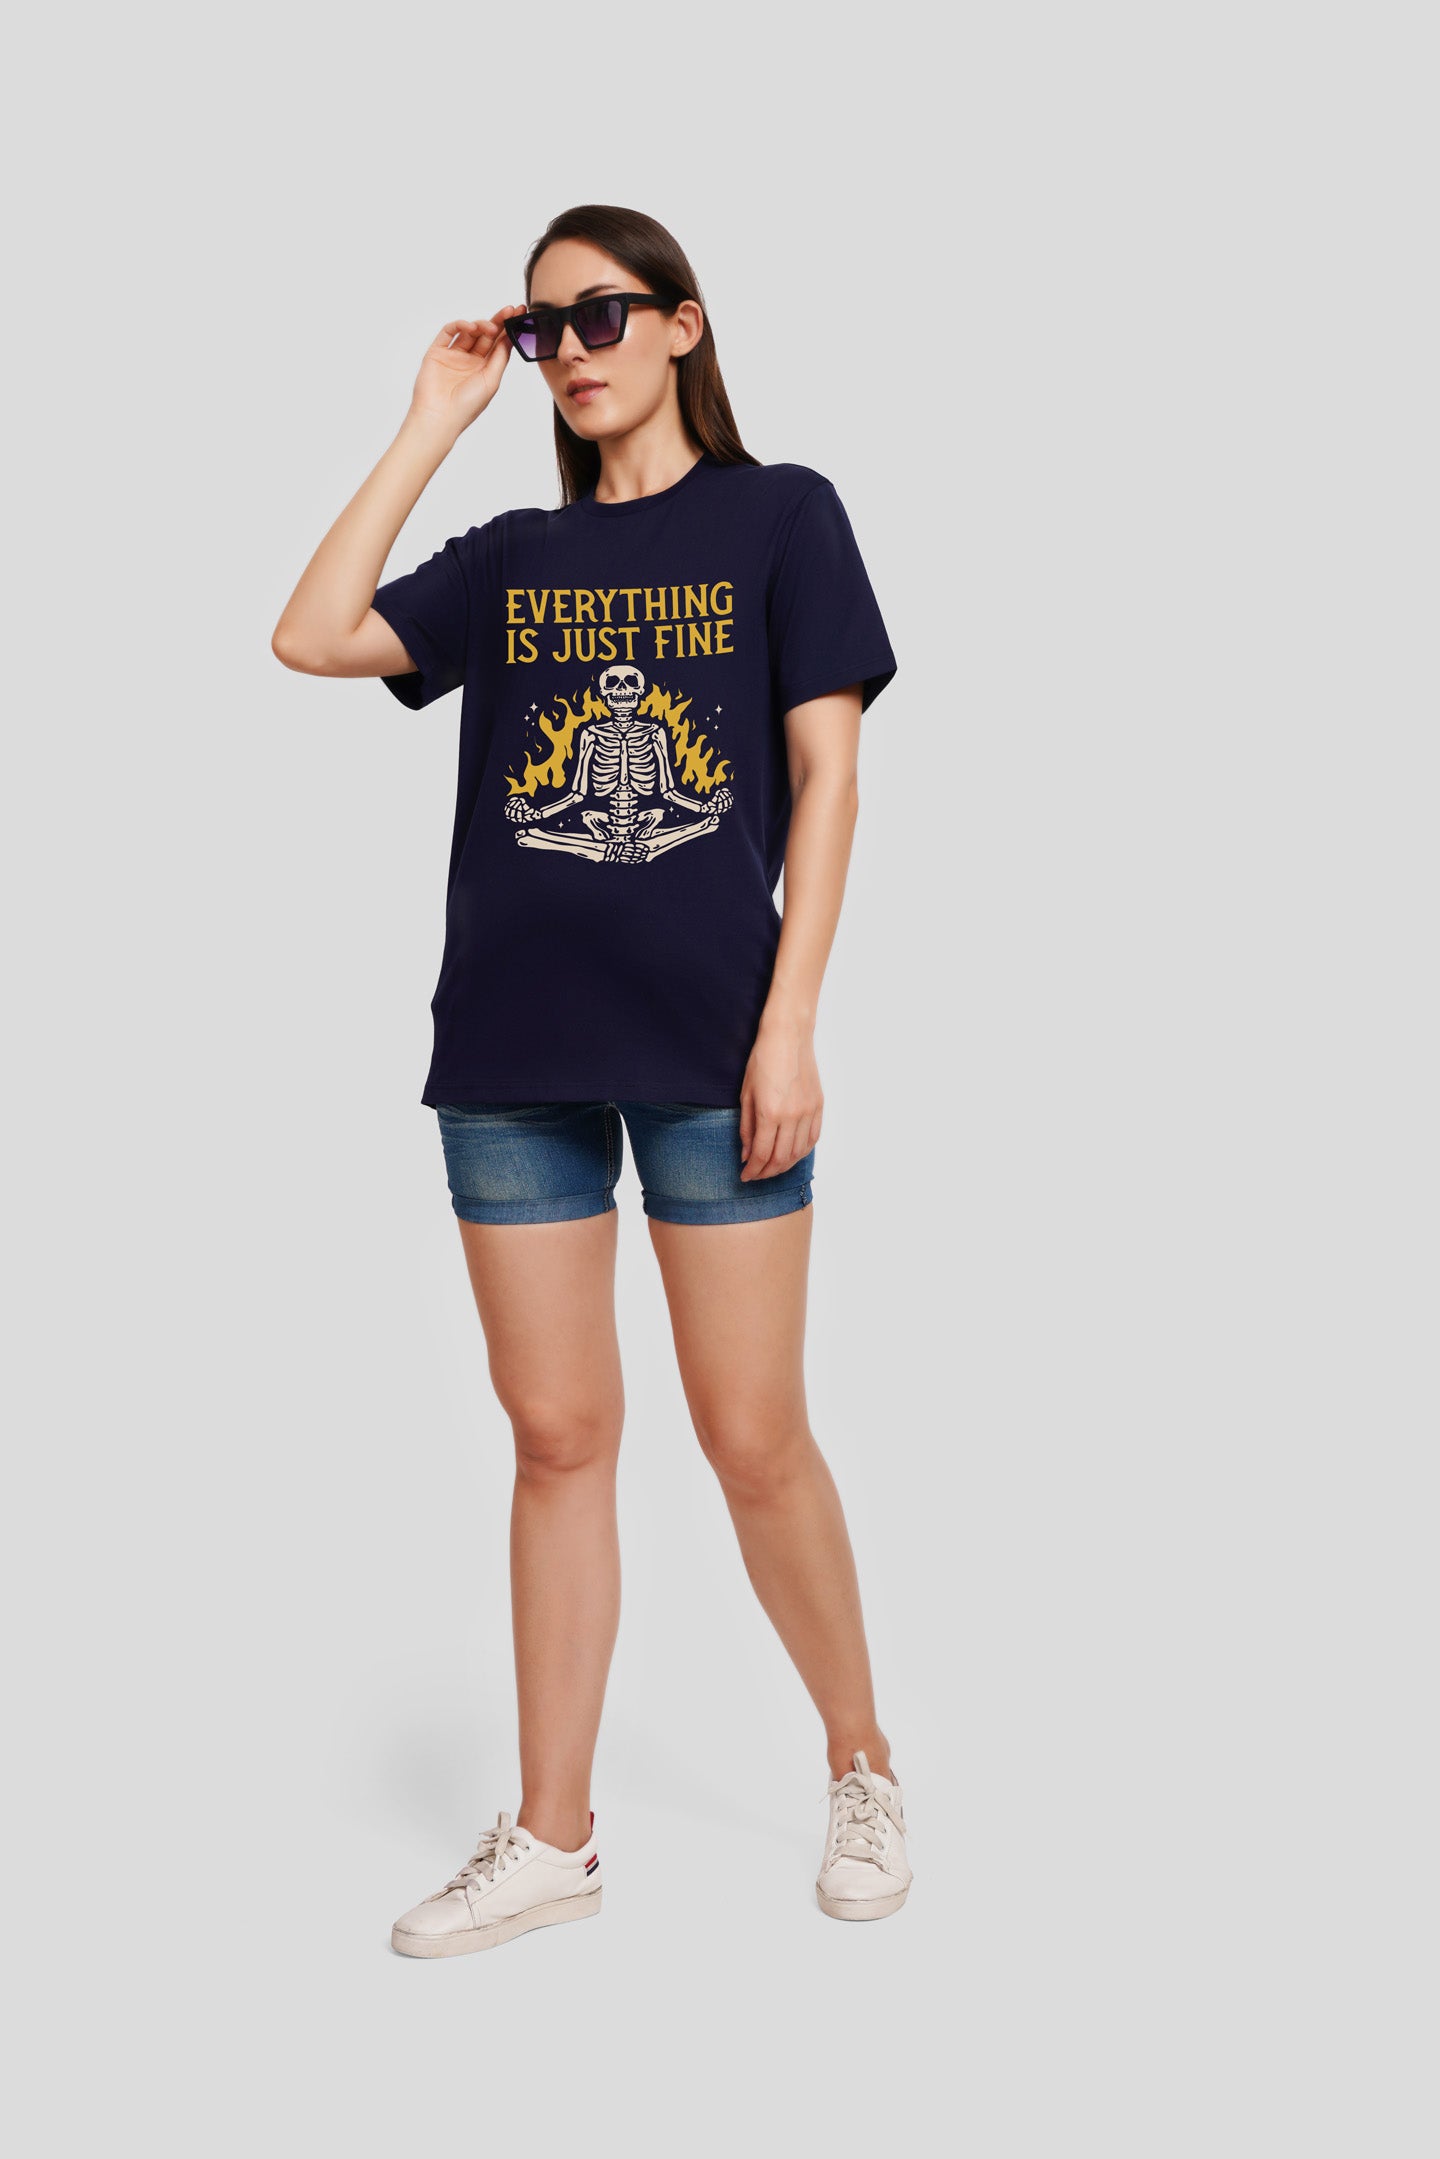 Everything Just Fine Navy Blue Printed T Shirt Women Boyfriend Fit With Front Design Pic 3